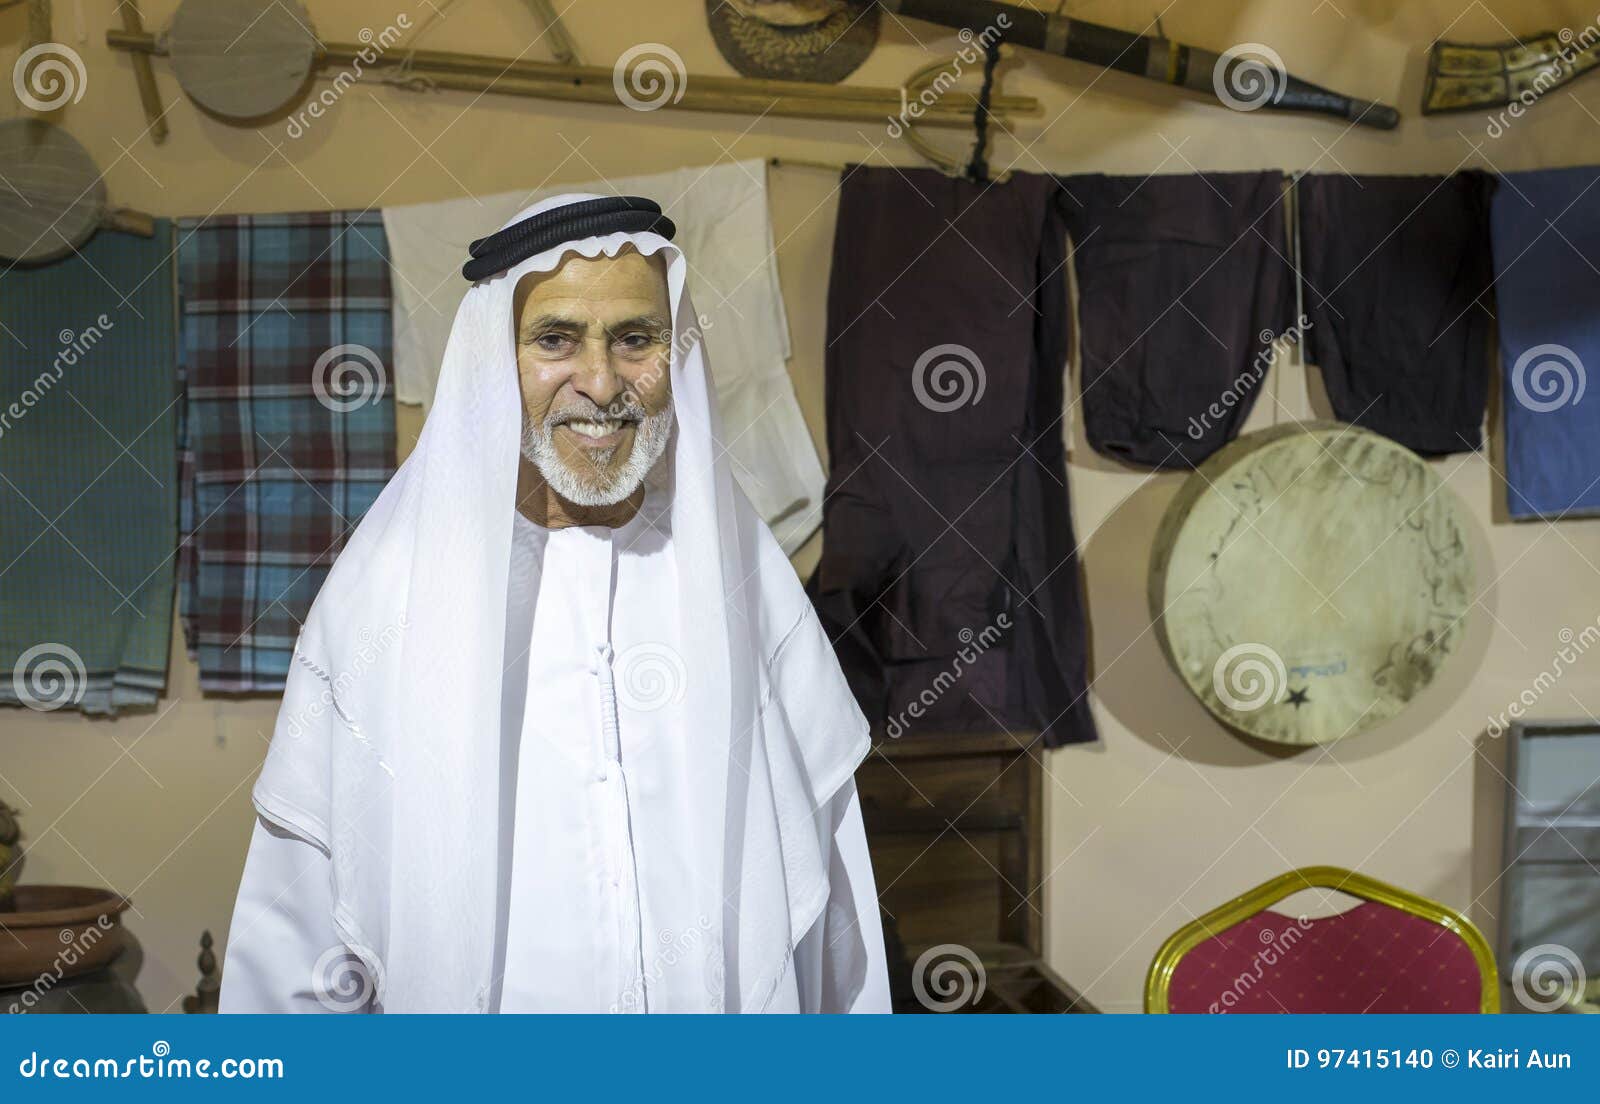 Image result for happy arab shopkeeper"